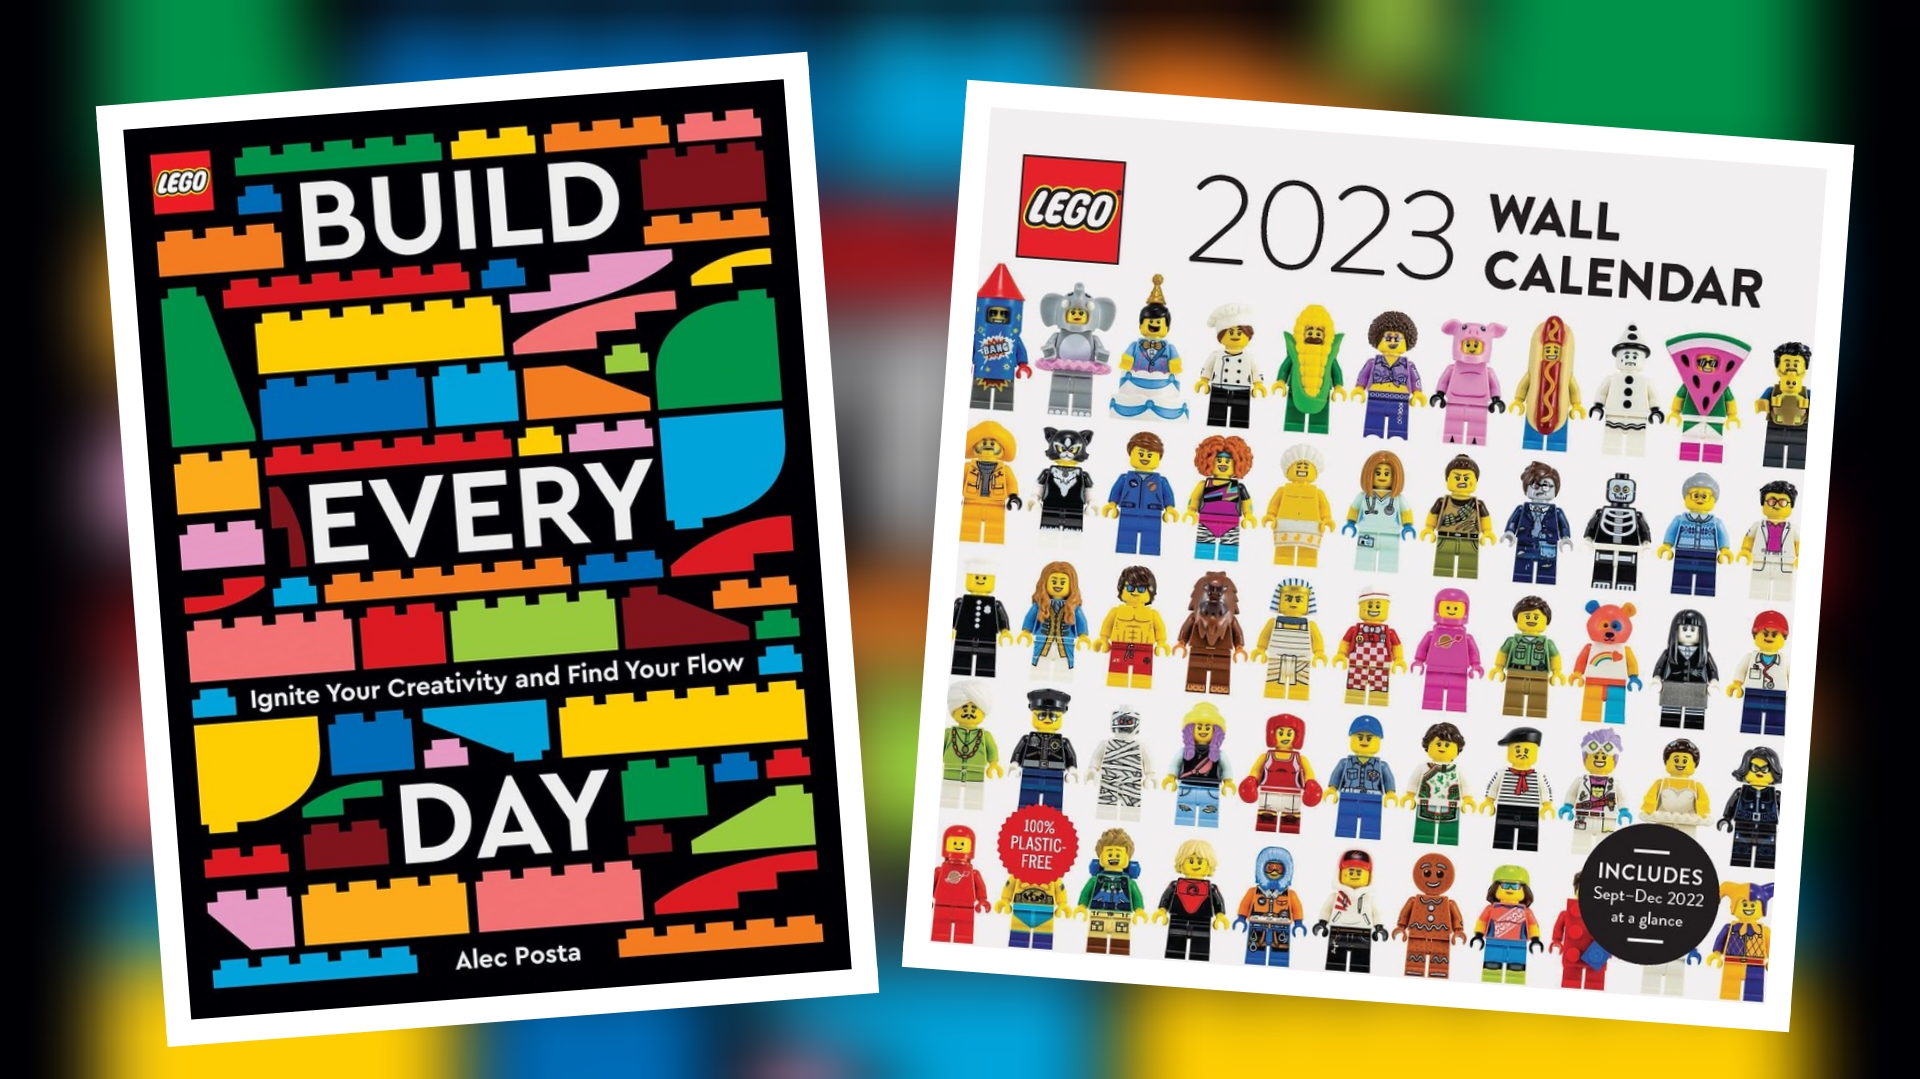 lego-build-every-day-book-and-2023-wall-calendar-revealed-the-brick-post